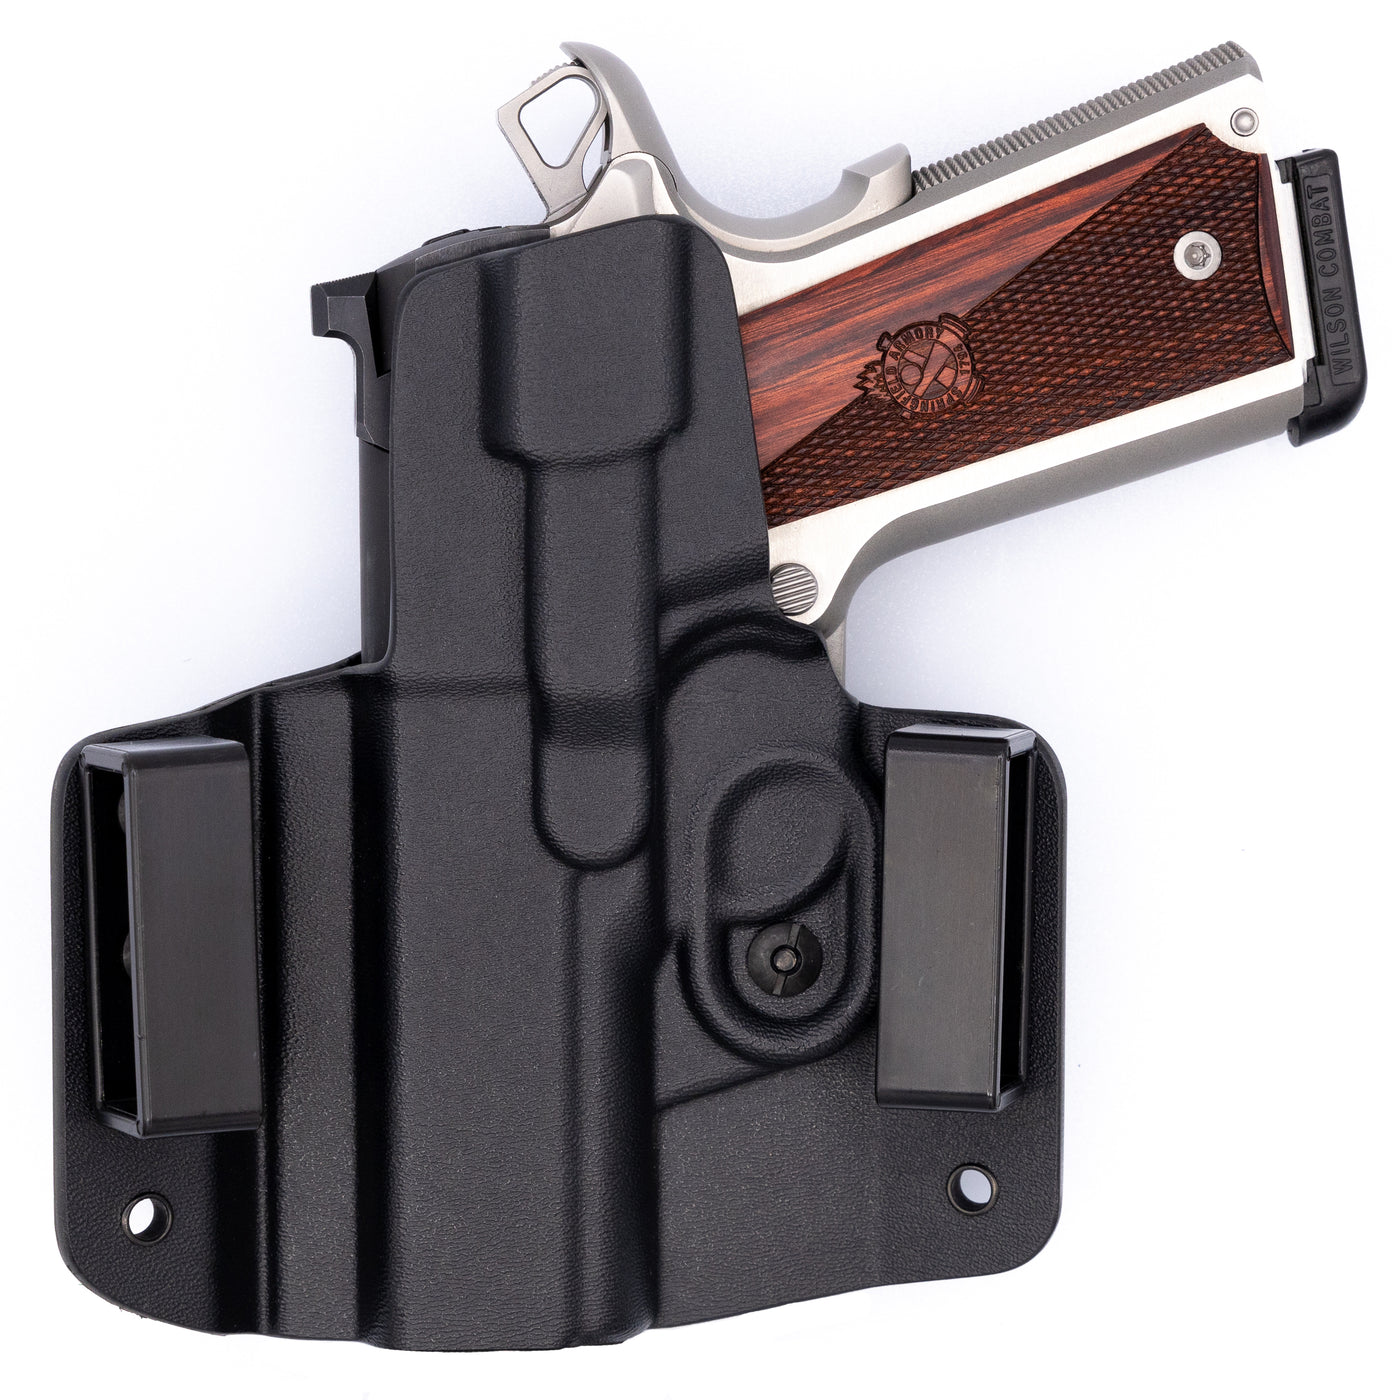 Shown is a quickship C&G Holster Covert series outside the waistband holster for a Colt Officer 1911.